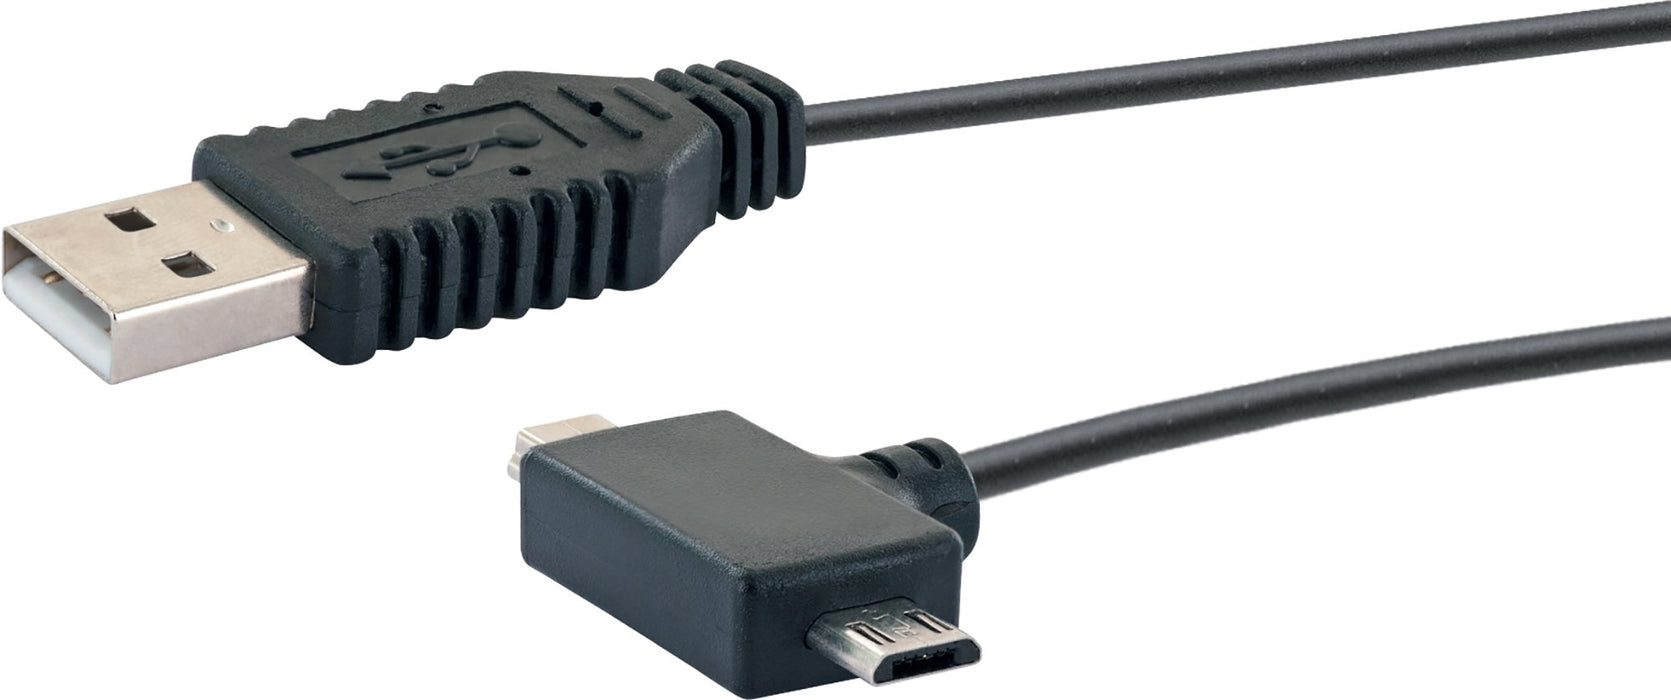 USB 2.0 connection cable